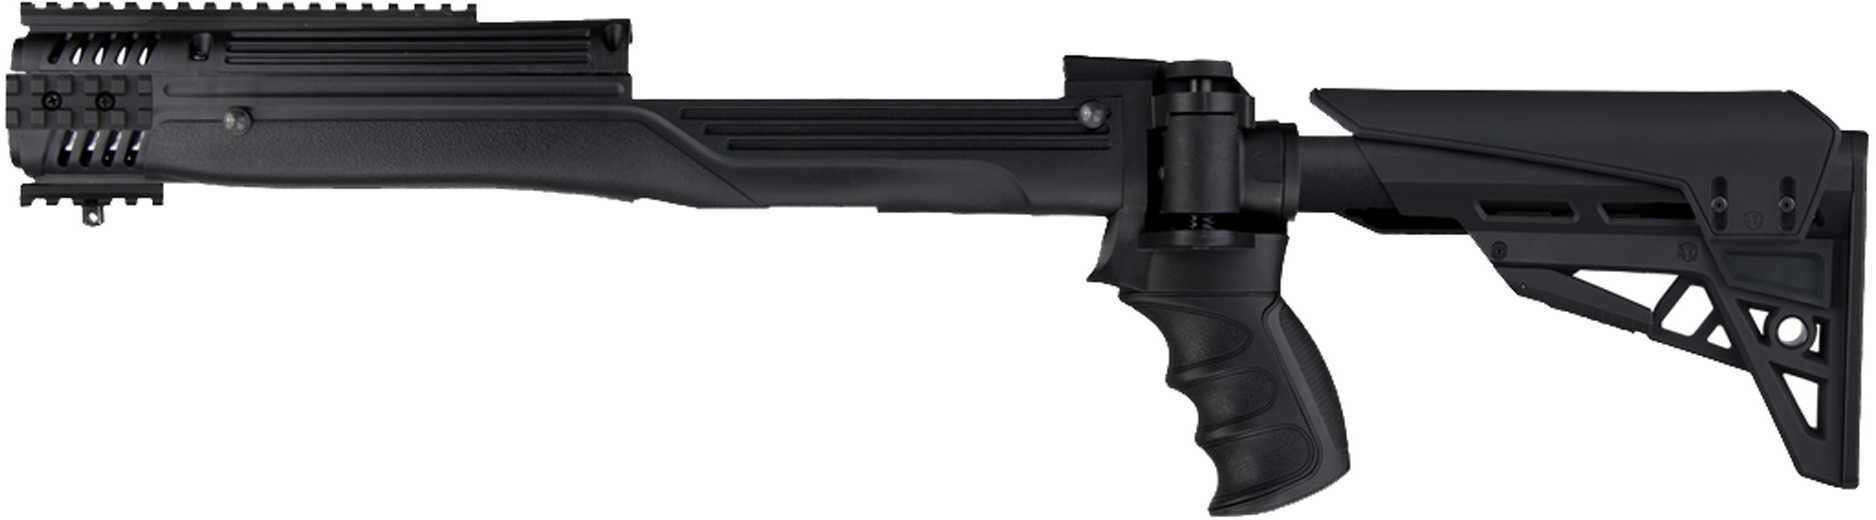 ATI Outdoors B2101210 Strikeforce Black Synthetic Chassis With Fully Adjustable Folding Stock, X-1 Style Grip, Fits Ruge